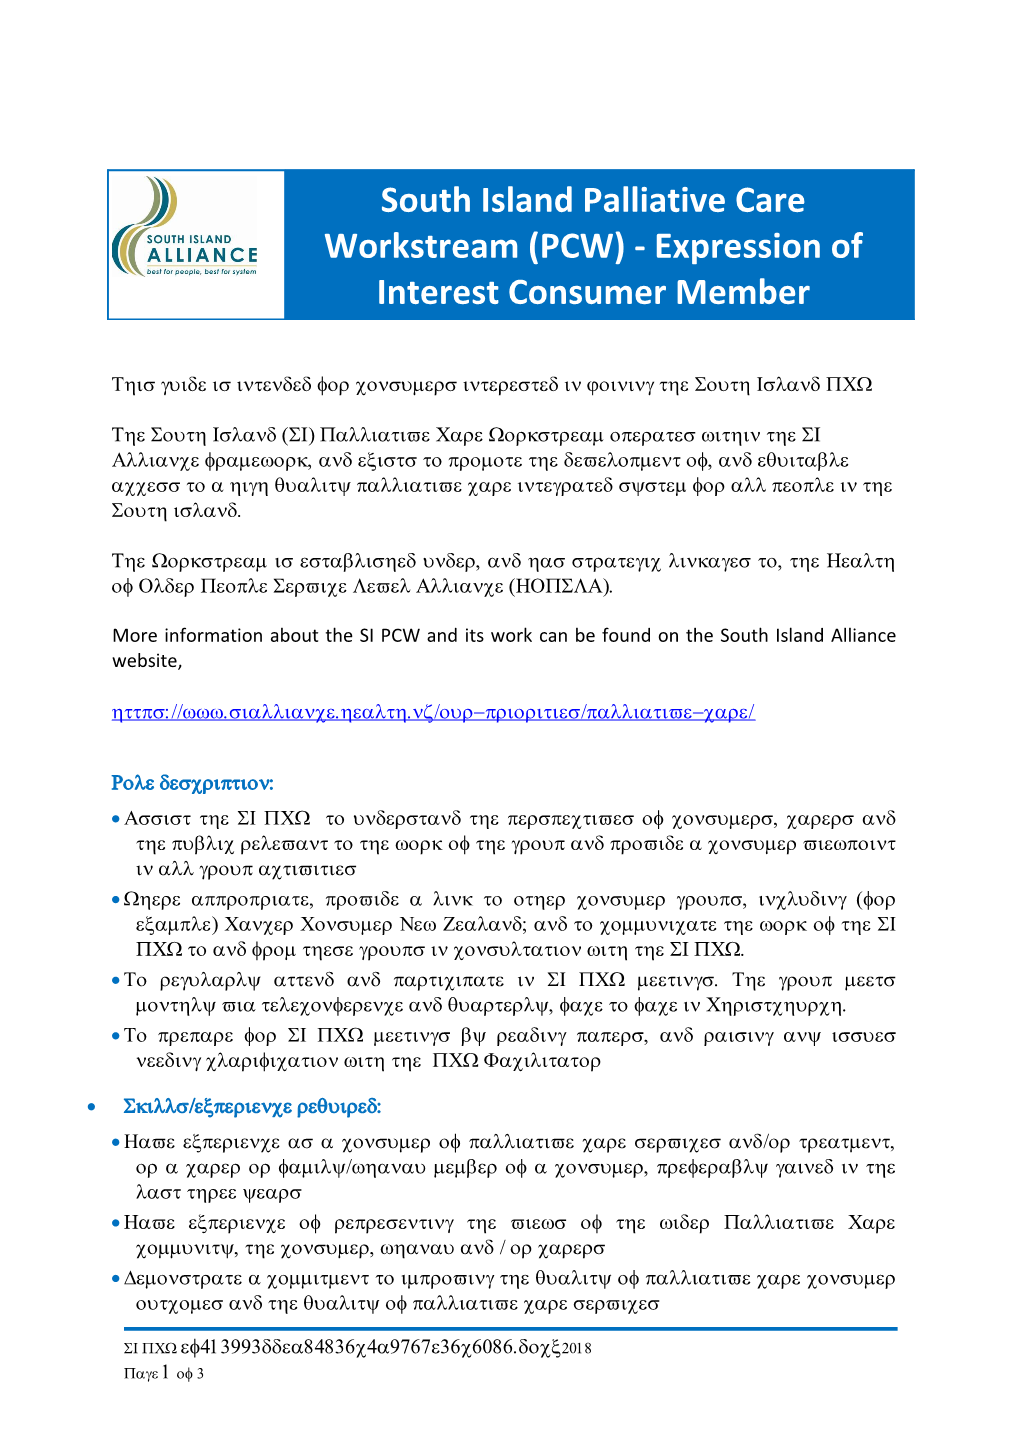 South Island Palliative Care Workstream (PCW) - Expression of Interest Consumer Member